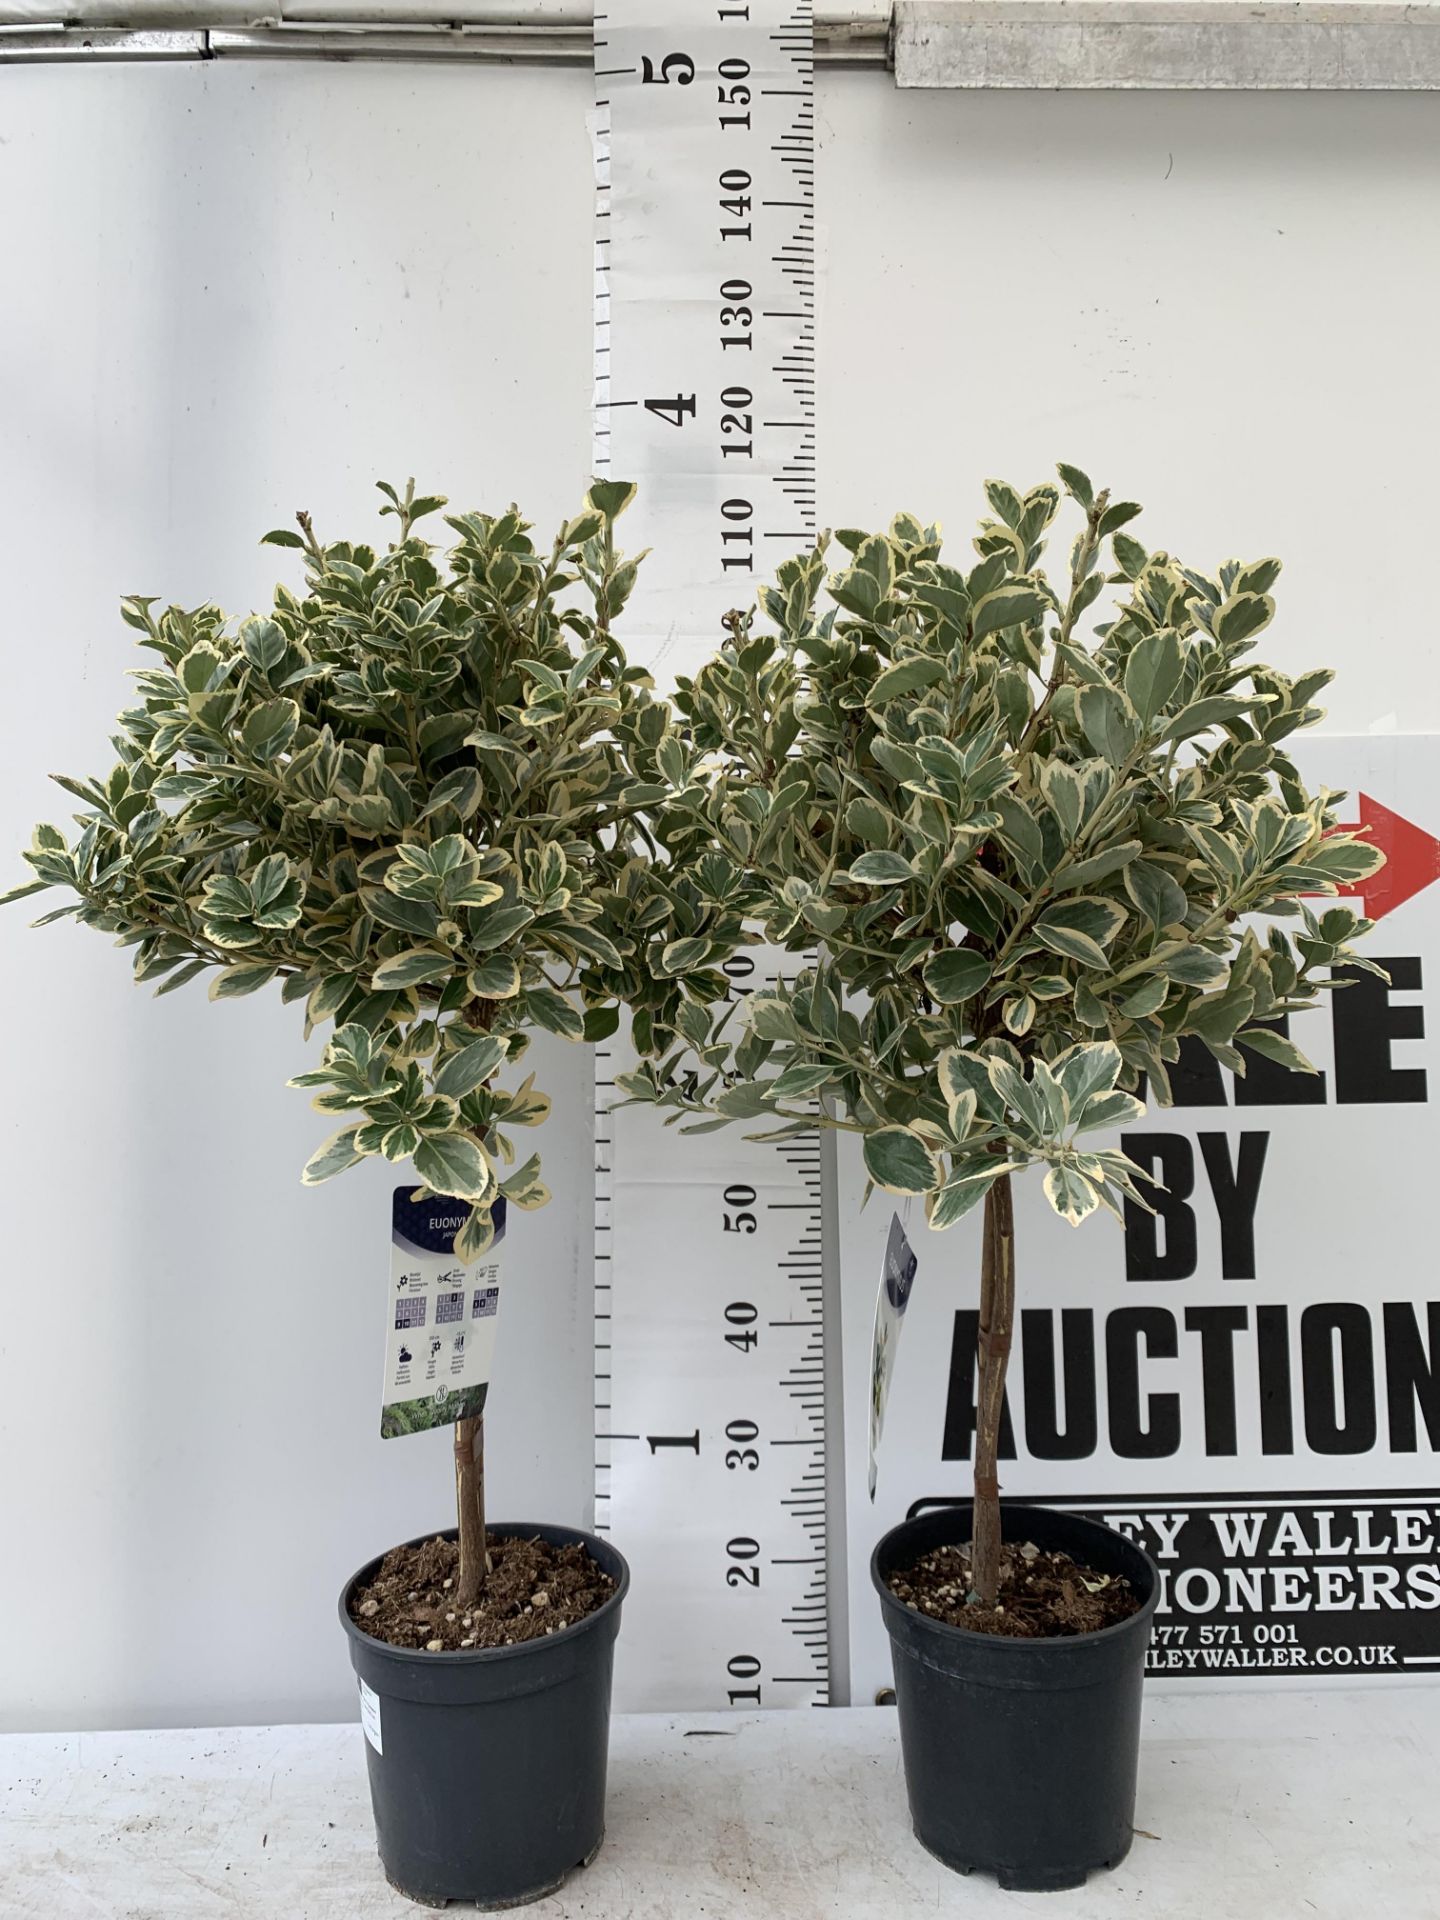 TWO EUONYMUS JAPONICUS STANDARD TREES APPROX 110CM IN HEIGHT IN 5 LTR POTS PLUS VAT TO BE SOLD FOR - Image 3 of 10